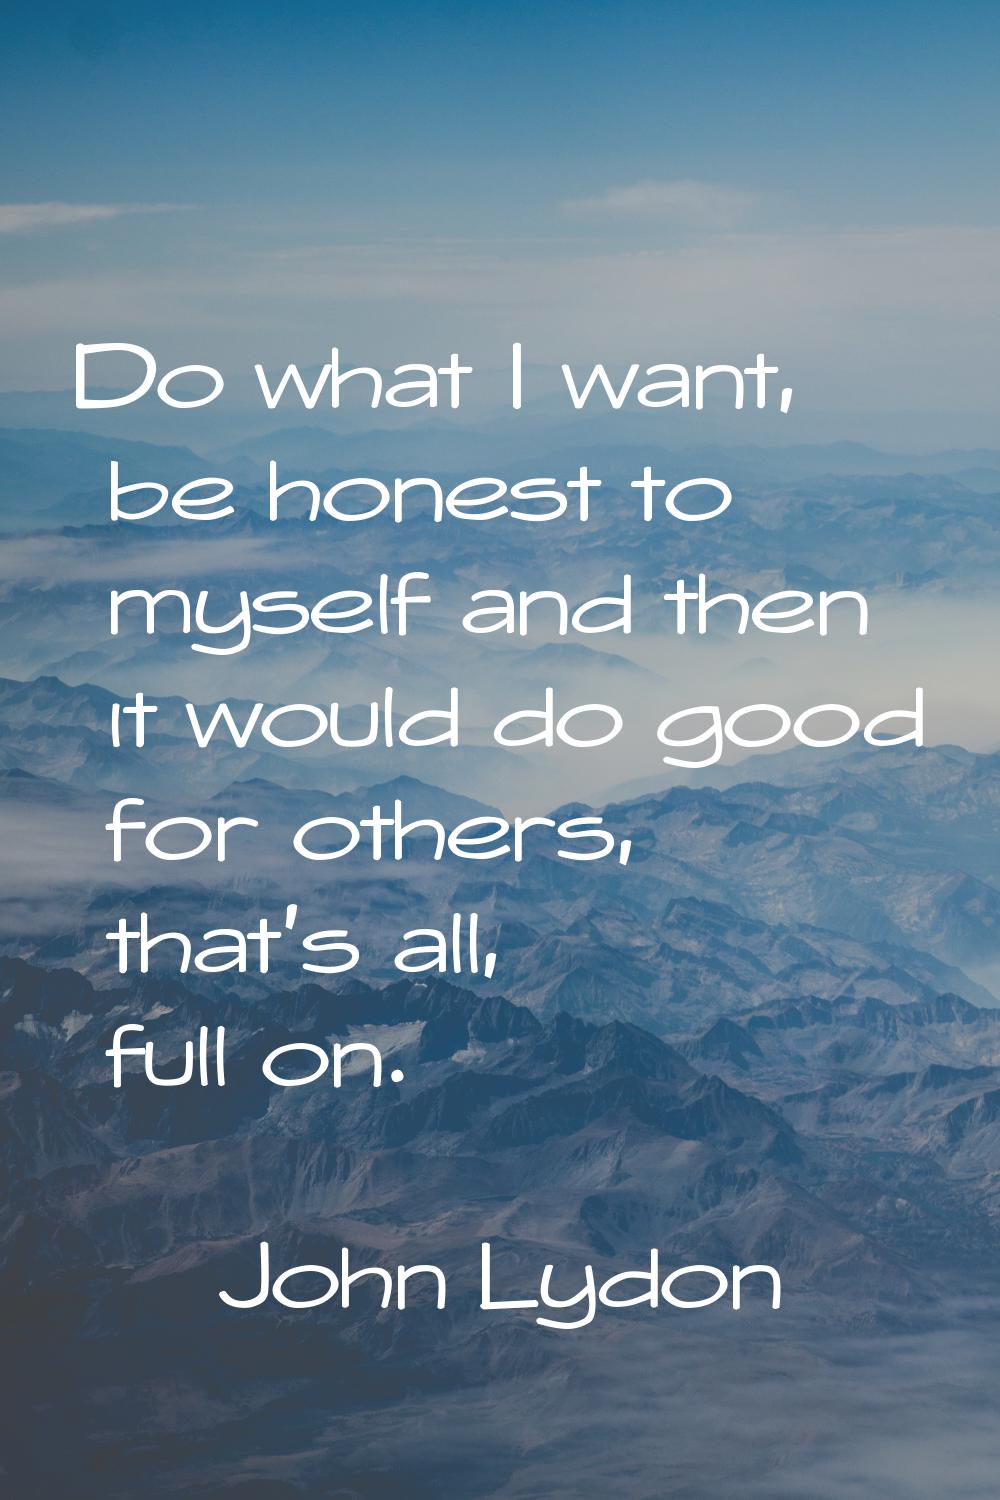 Do what I want, be honest to myself and then it would do good for others, that's all, full on.